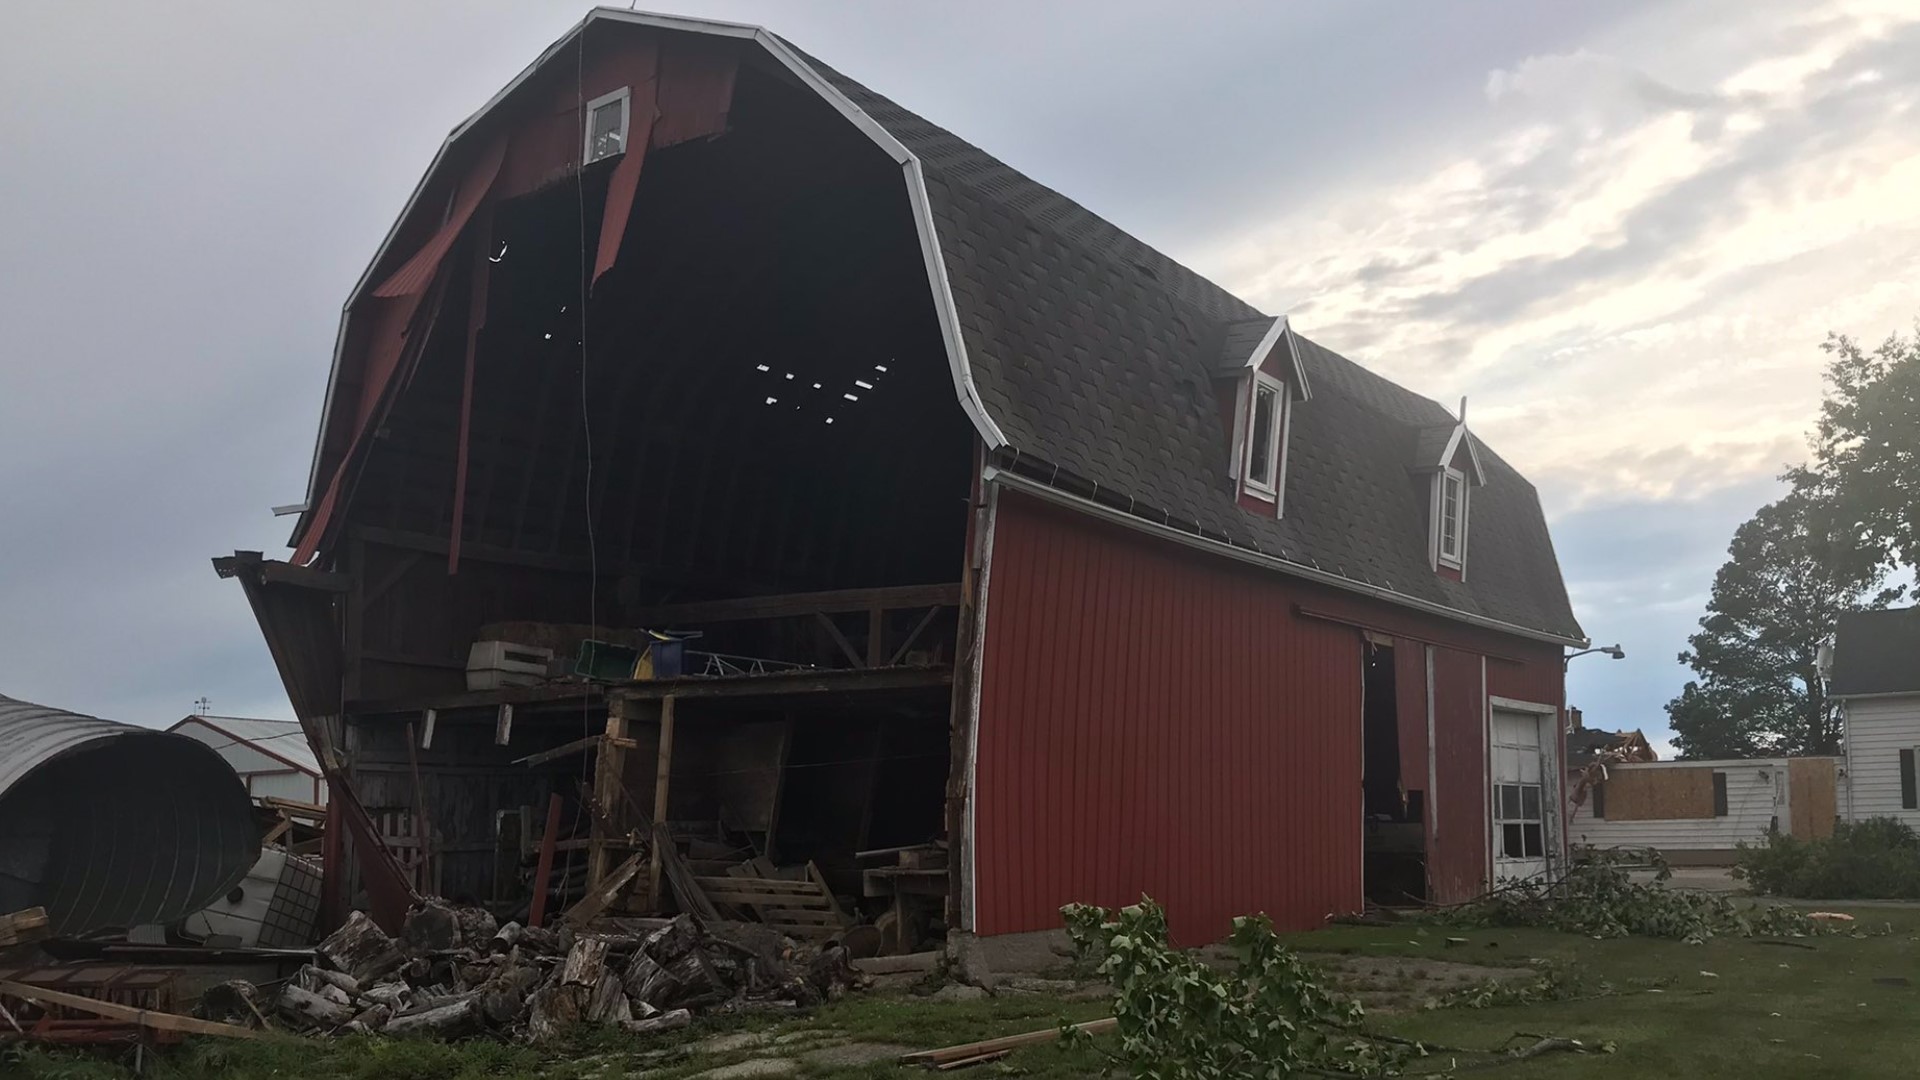 Multiple people are still without power 24 hours after storms rolled through Sunday night, including an EF-1 tornado that destroyed buildings and damaged homes.